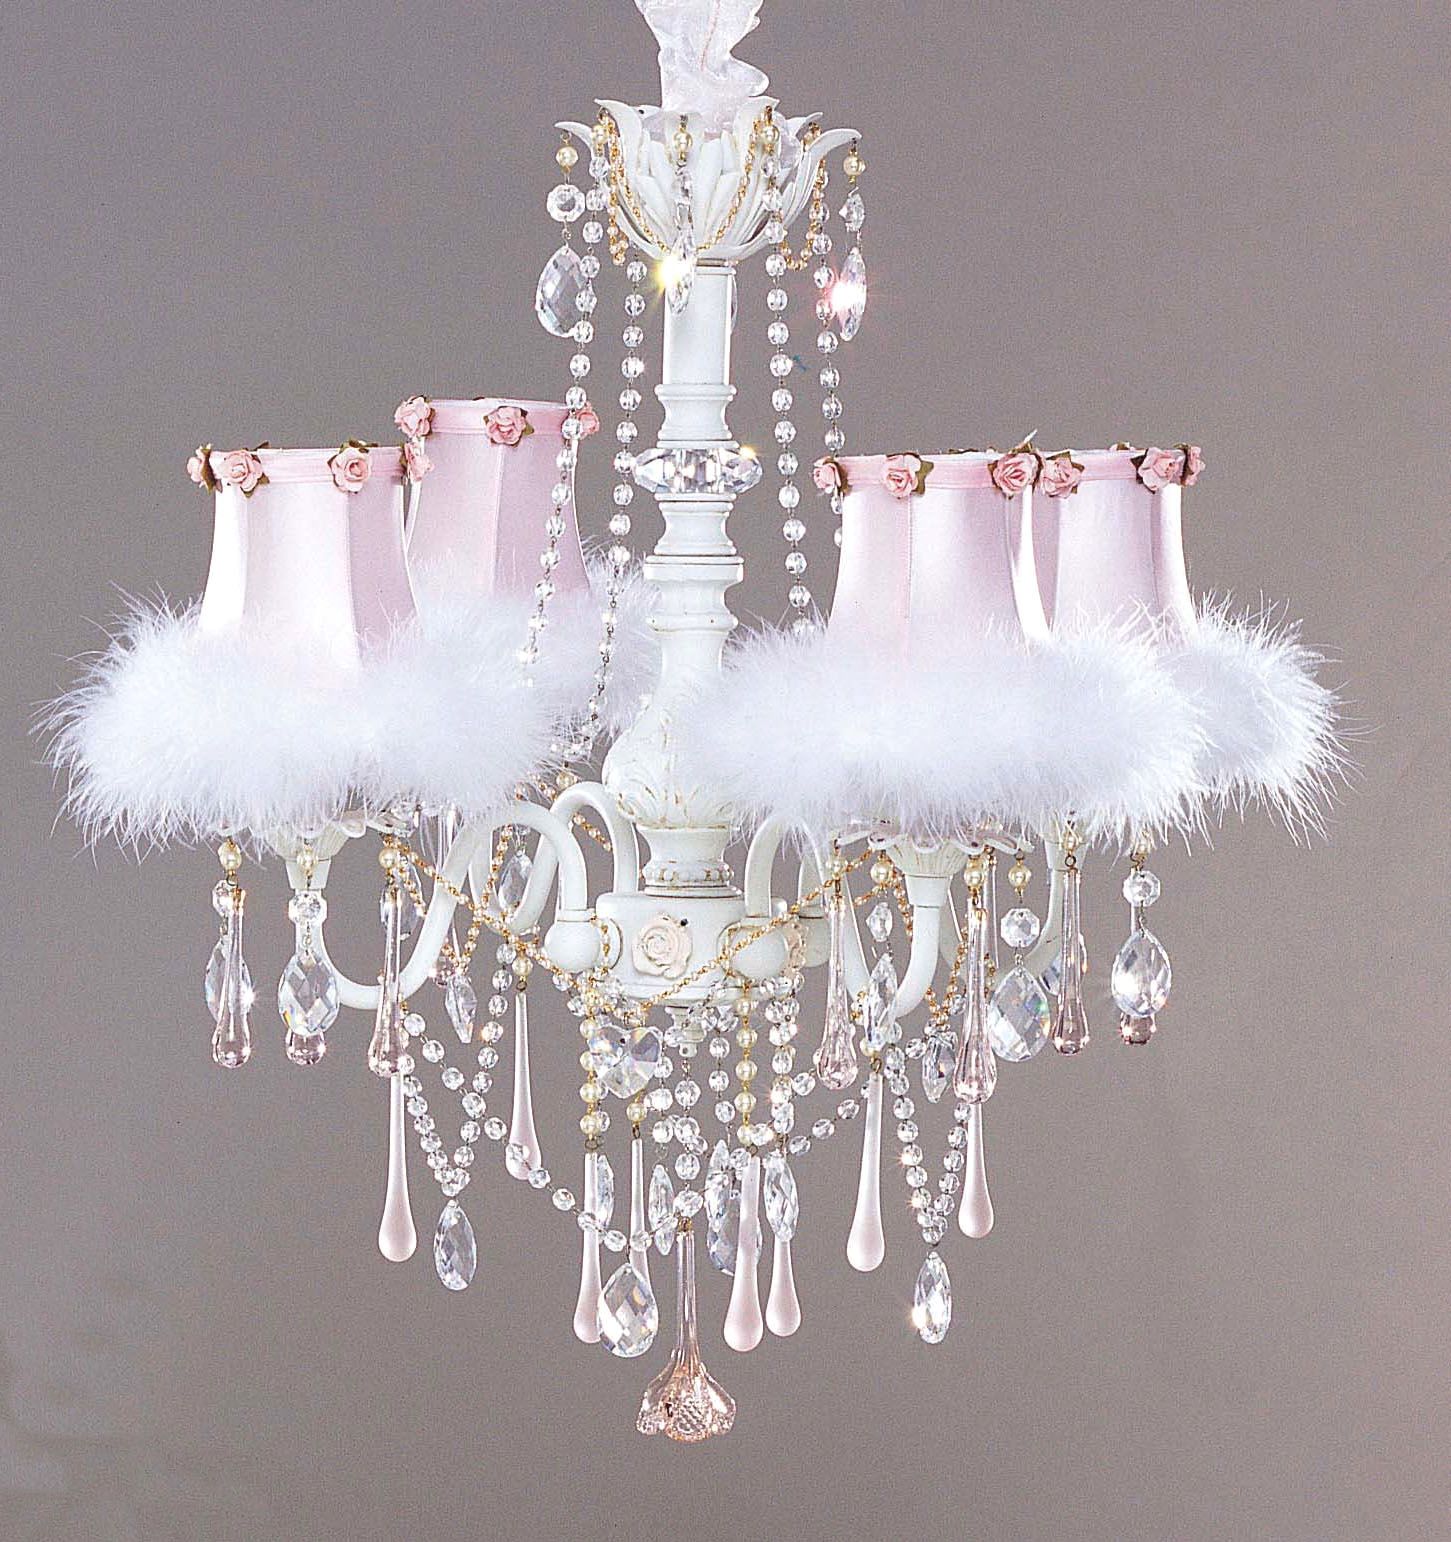 Mini Crystal Chandelier James R Moder Granada Crystal Minipendant Throughout Tiny Chandeliers (View 12 of 12)